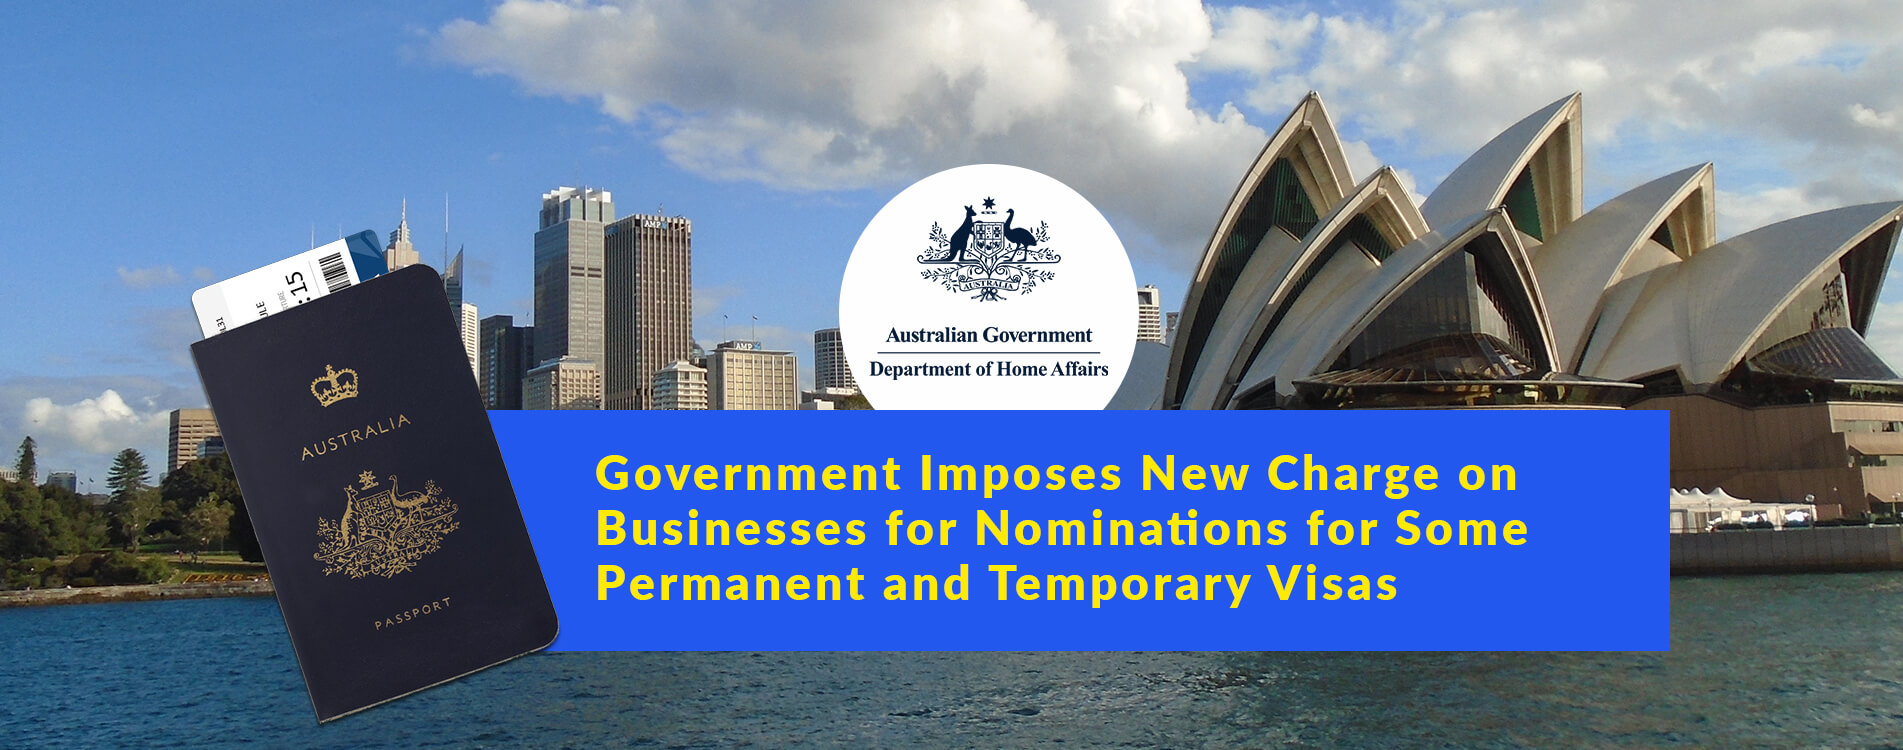 Government Imposes New Charge on Businesses for Nominations for Some Permanent and Temporary Visas